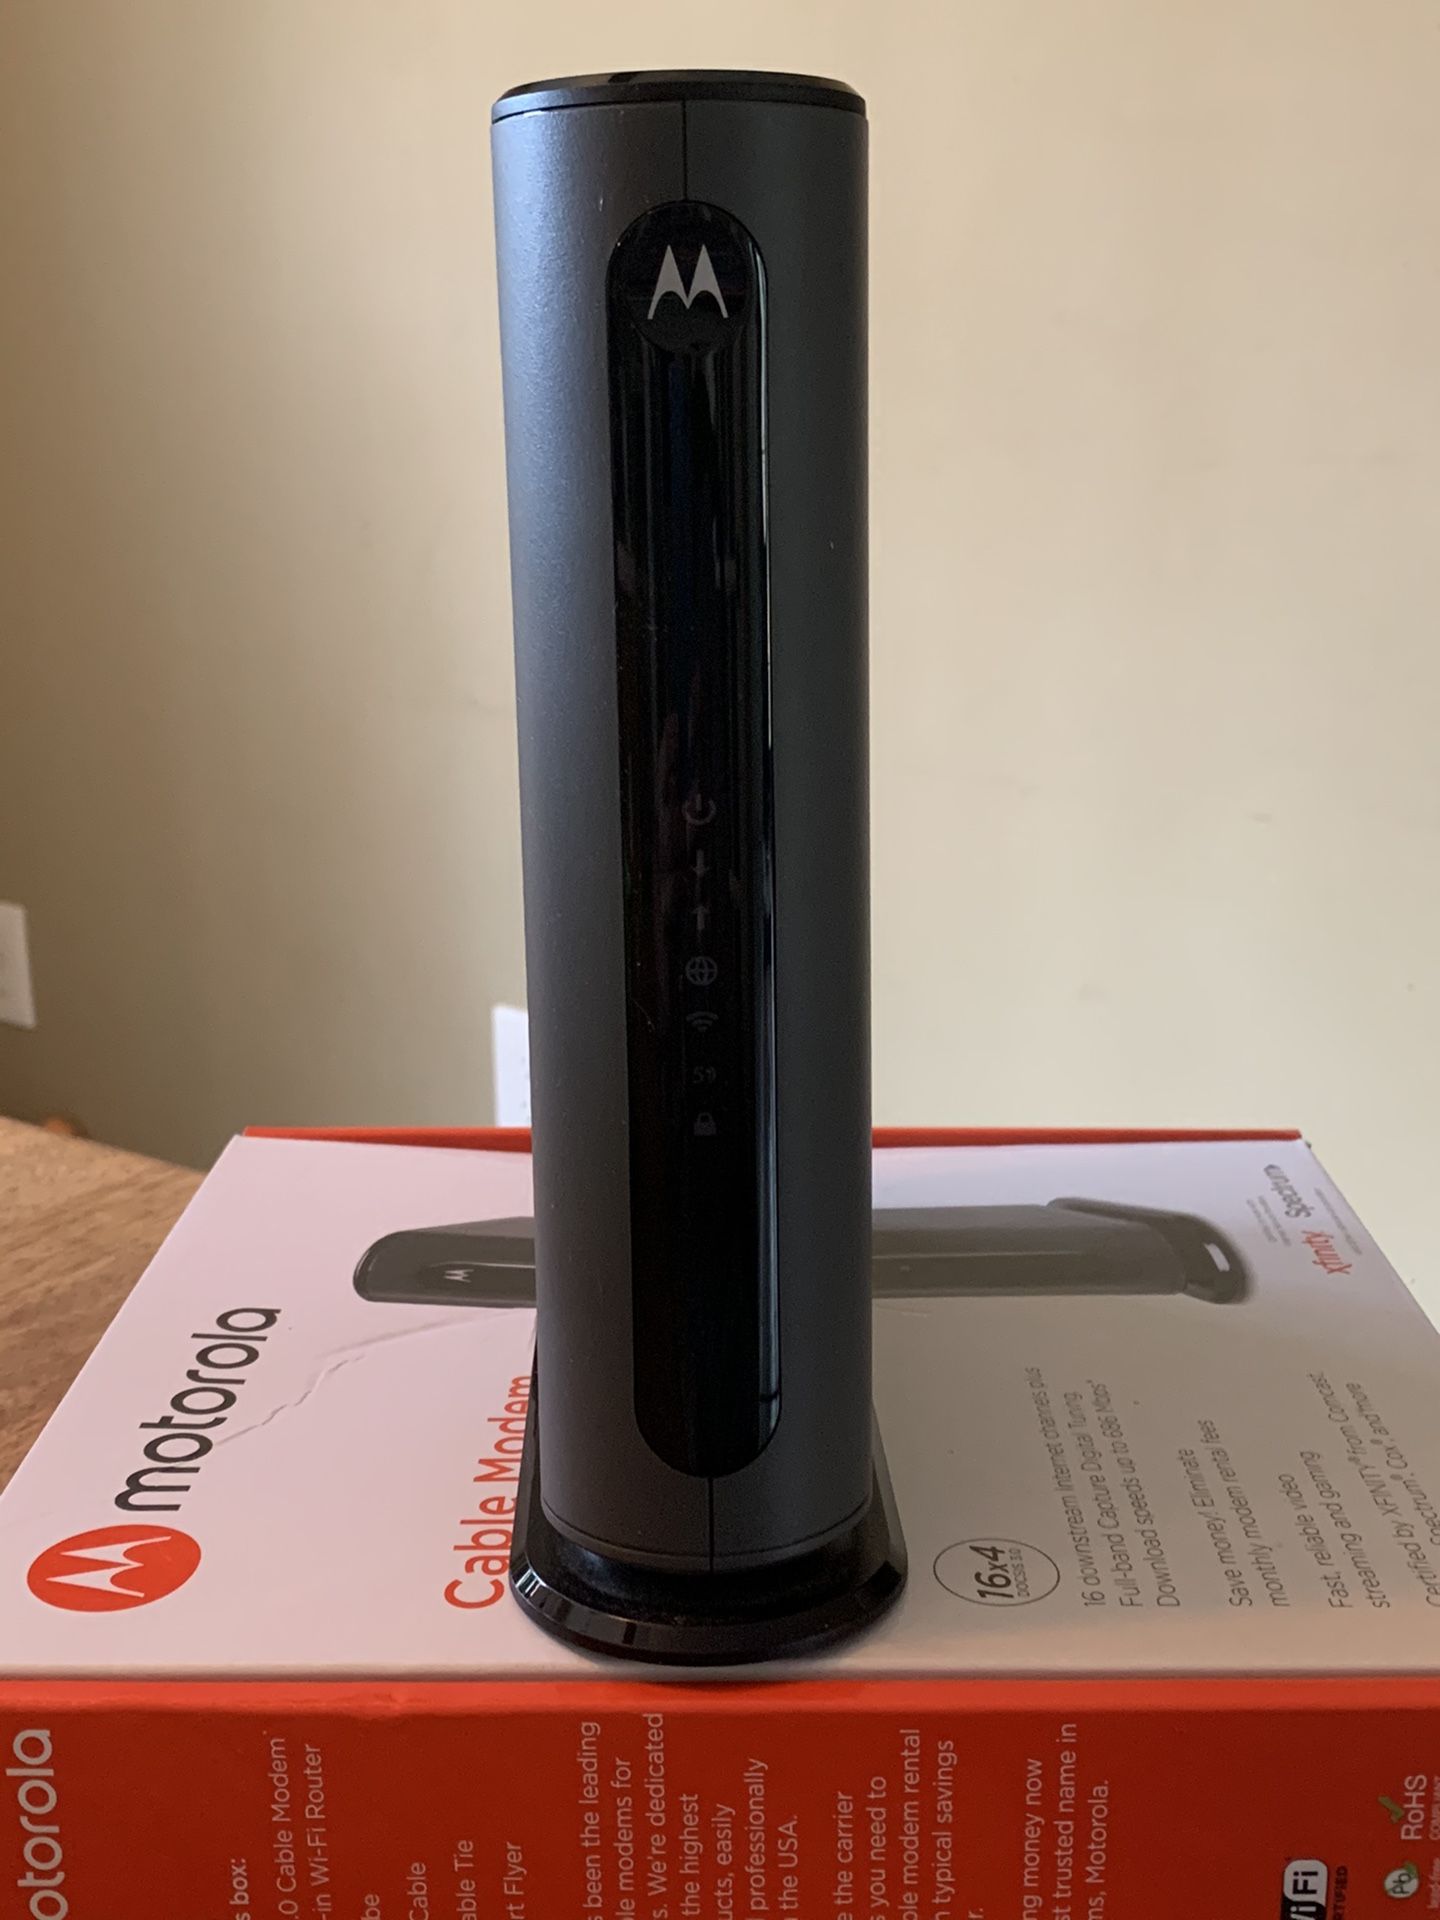 Motorola AC1600 Cable Modem plus Router-$140 New. Works with Xfinity!